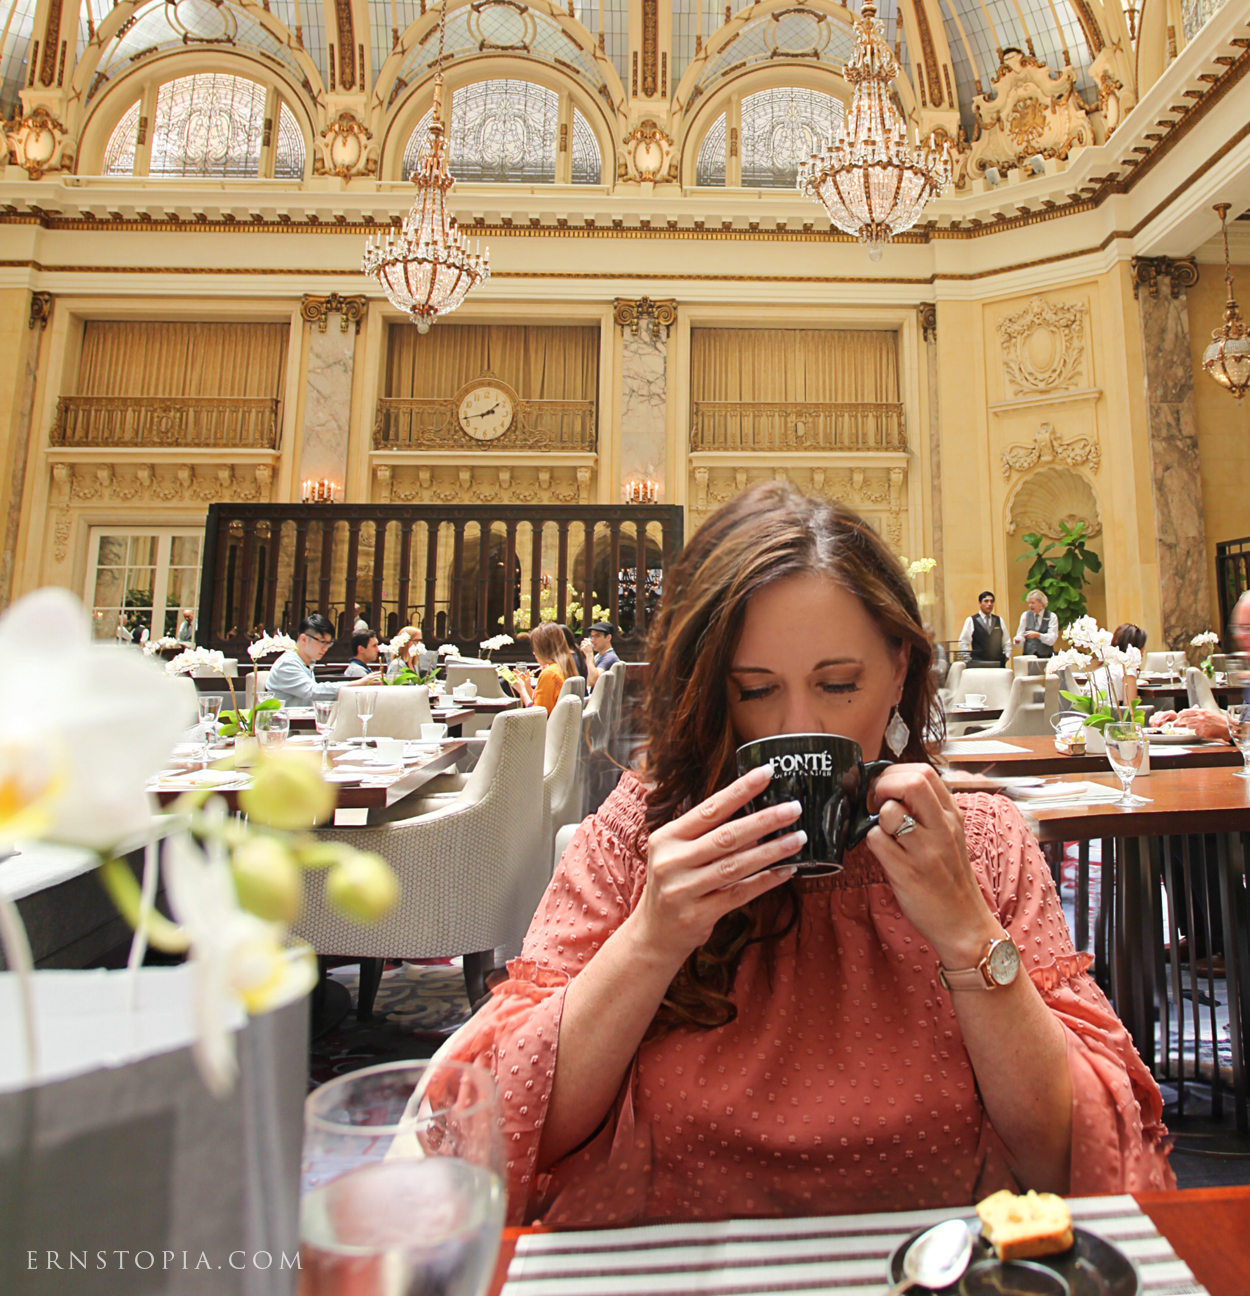 Lunch at the Palace hotel in San Francisco